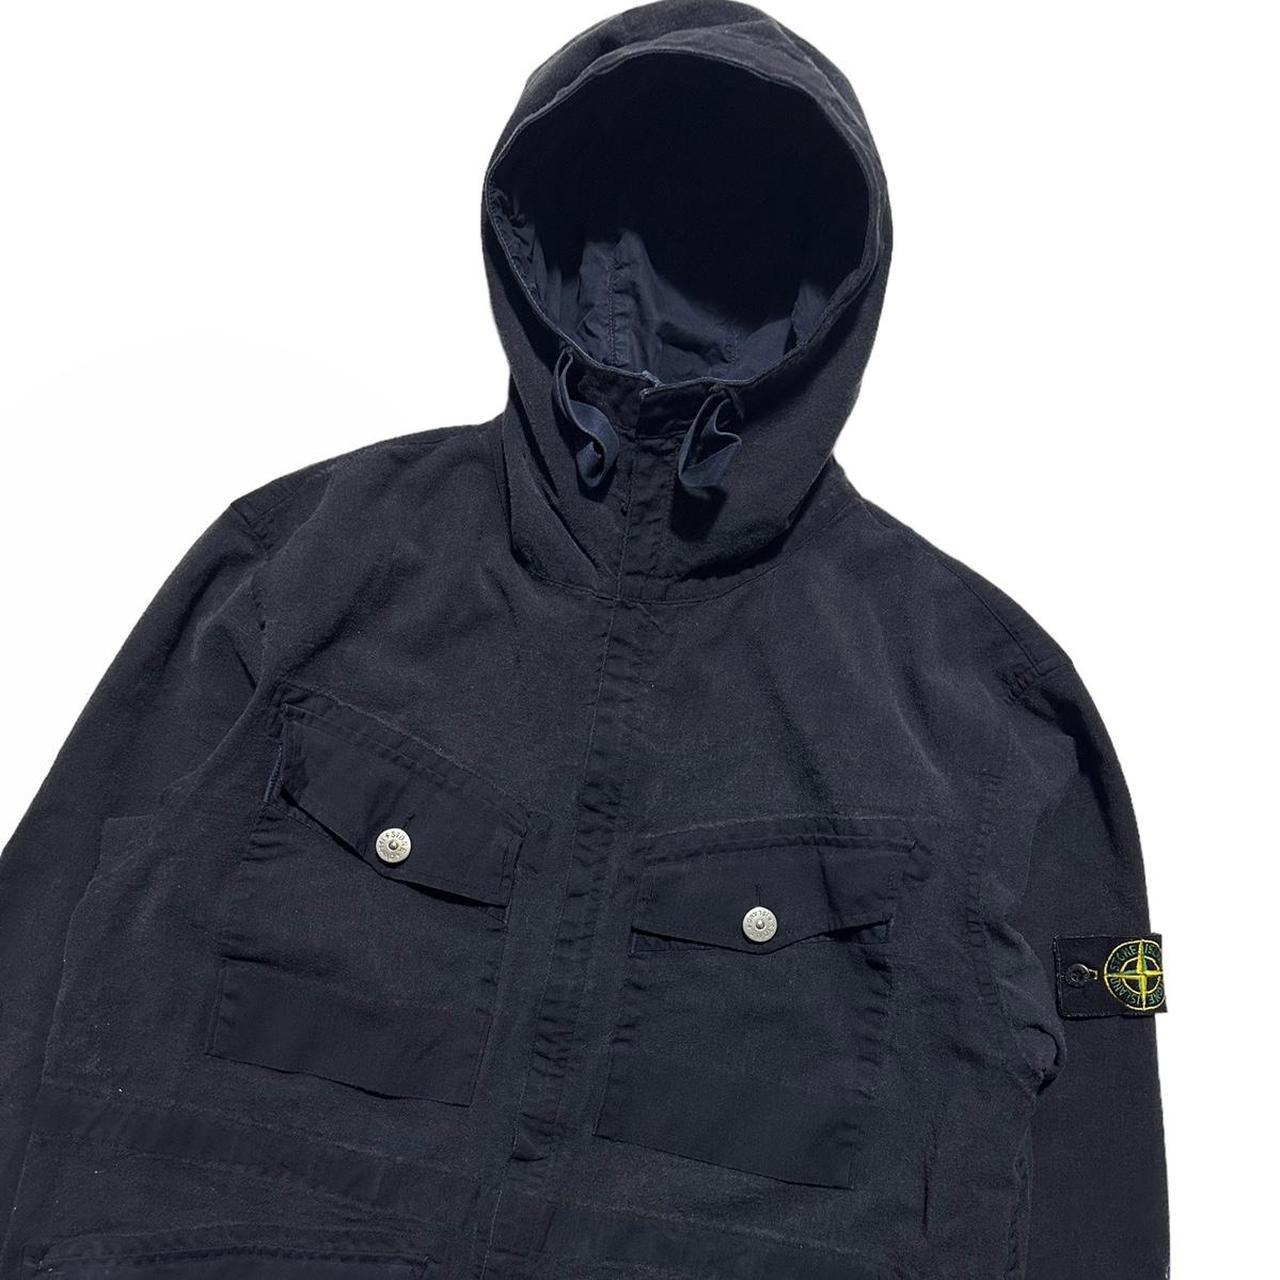 Stone Island Multipocket Jacket - Known Source